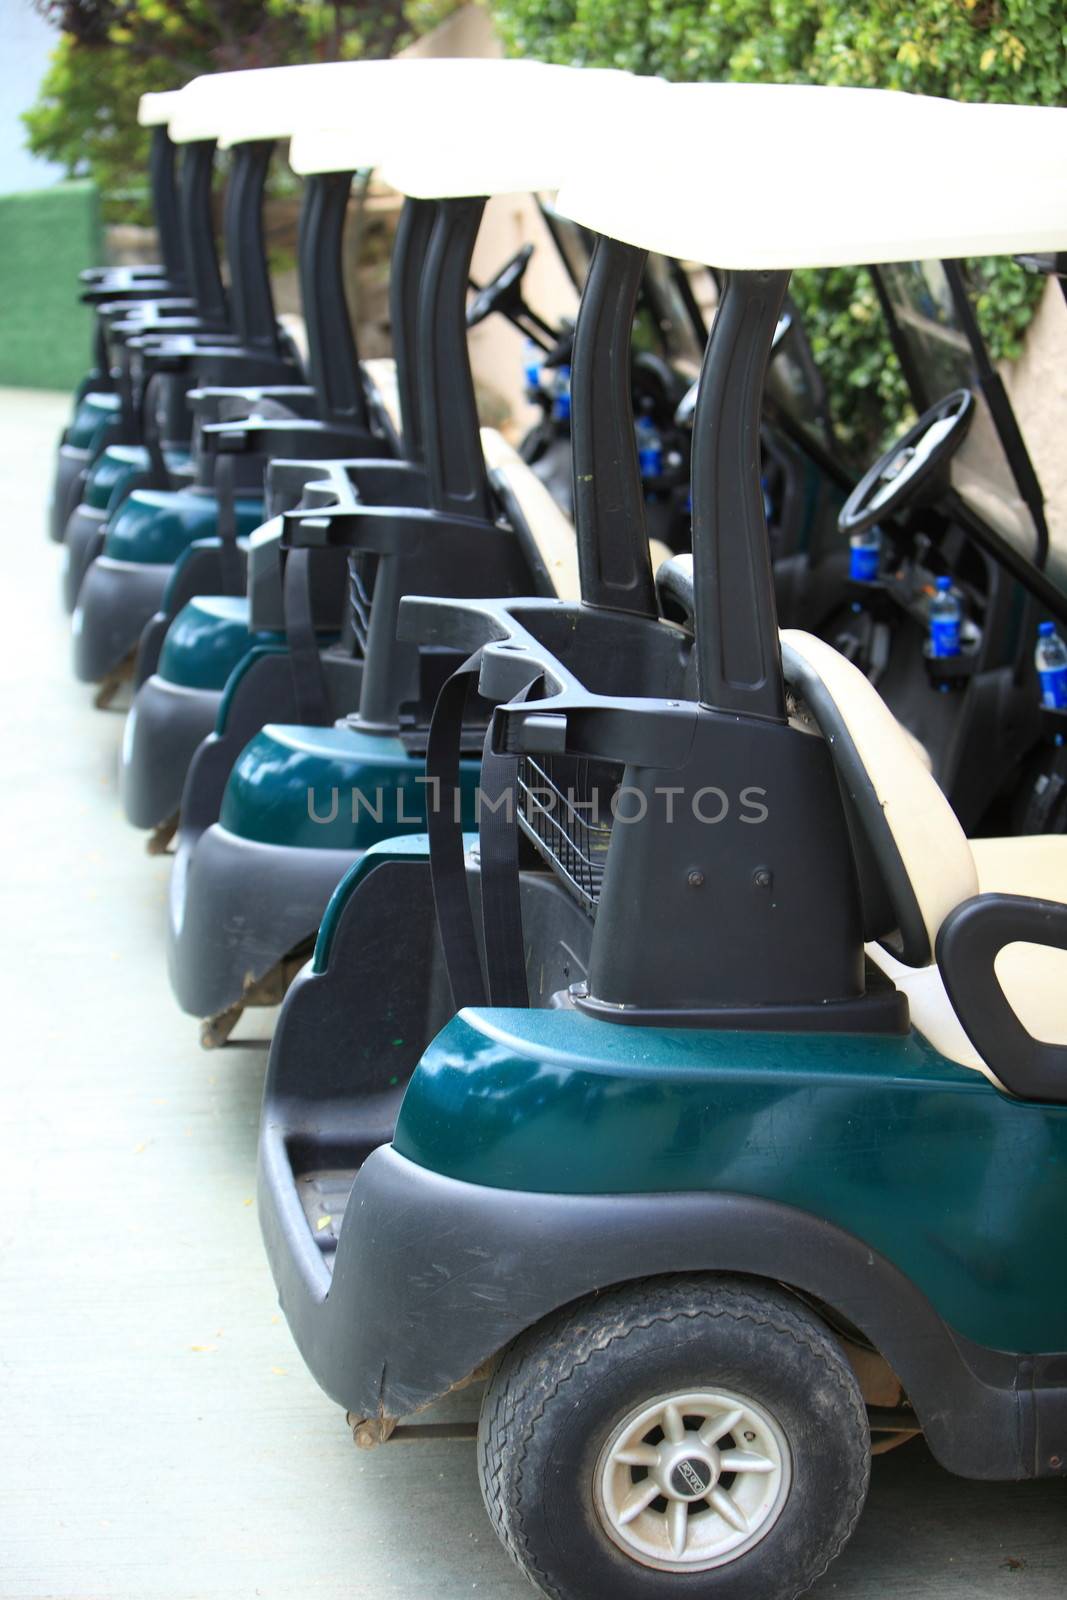 High quality modern golf carts vertically aligned